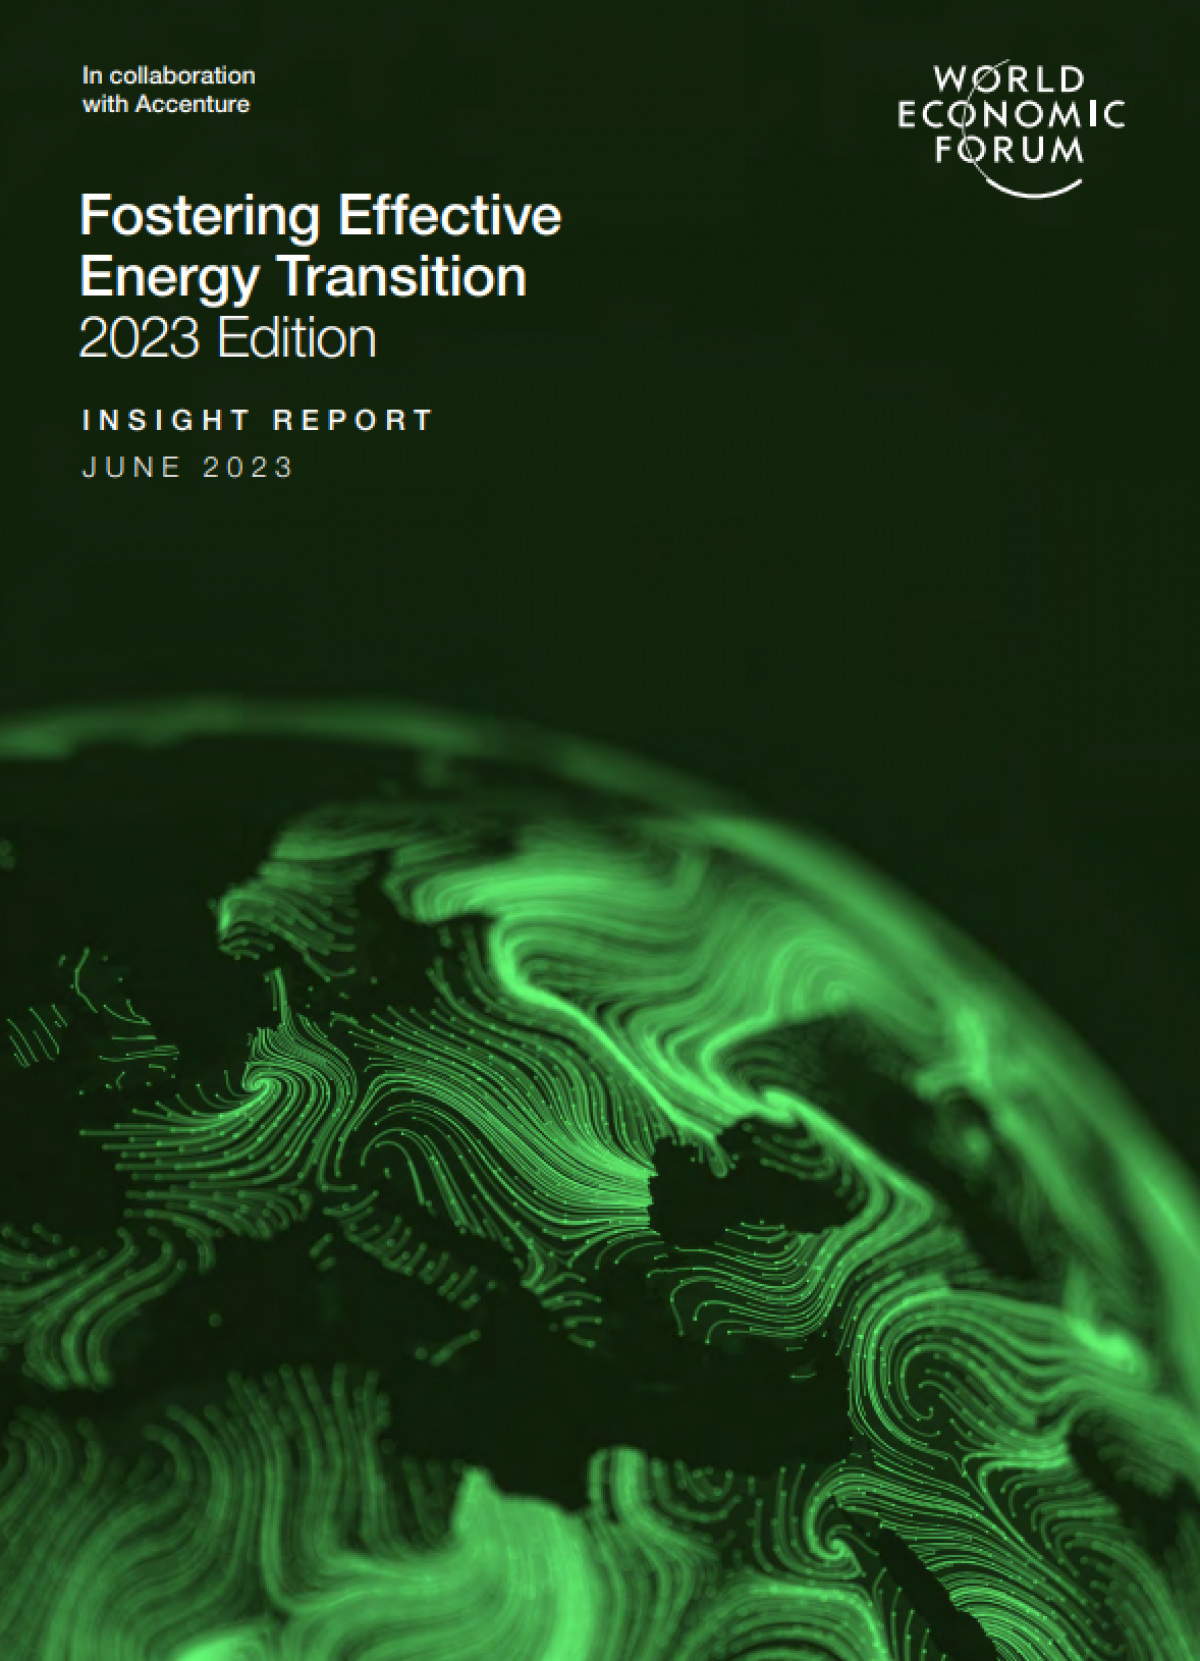 Azerbaijan advanced to the 32nd place in the "Promotion of Efficient Energy Transition-2023" report